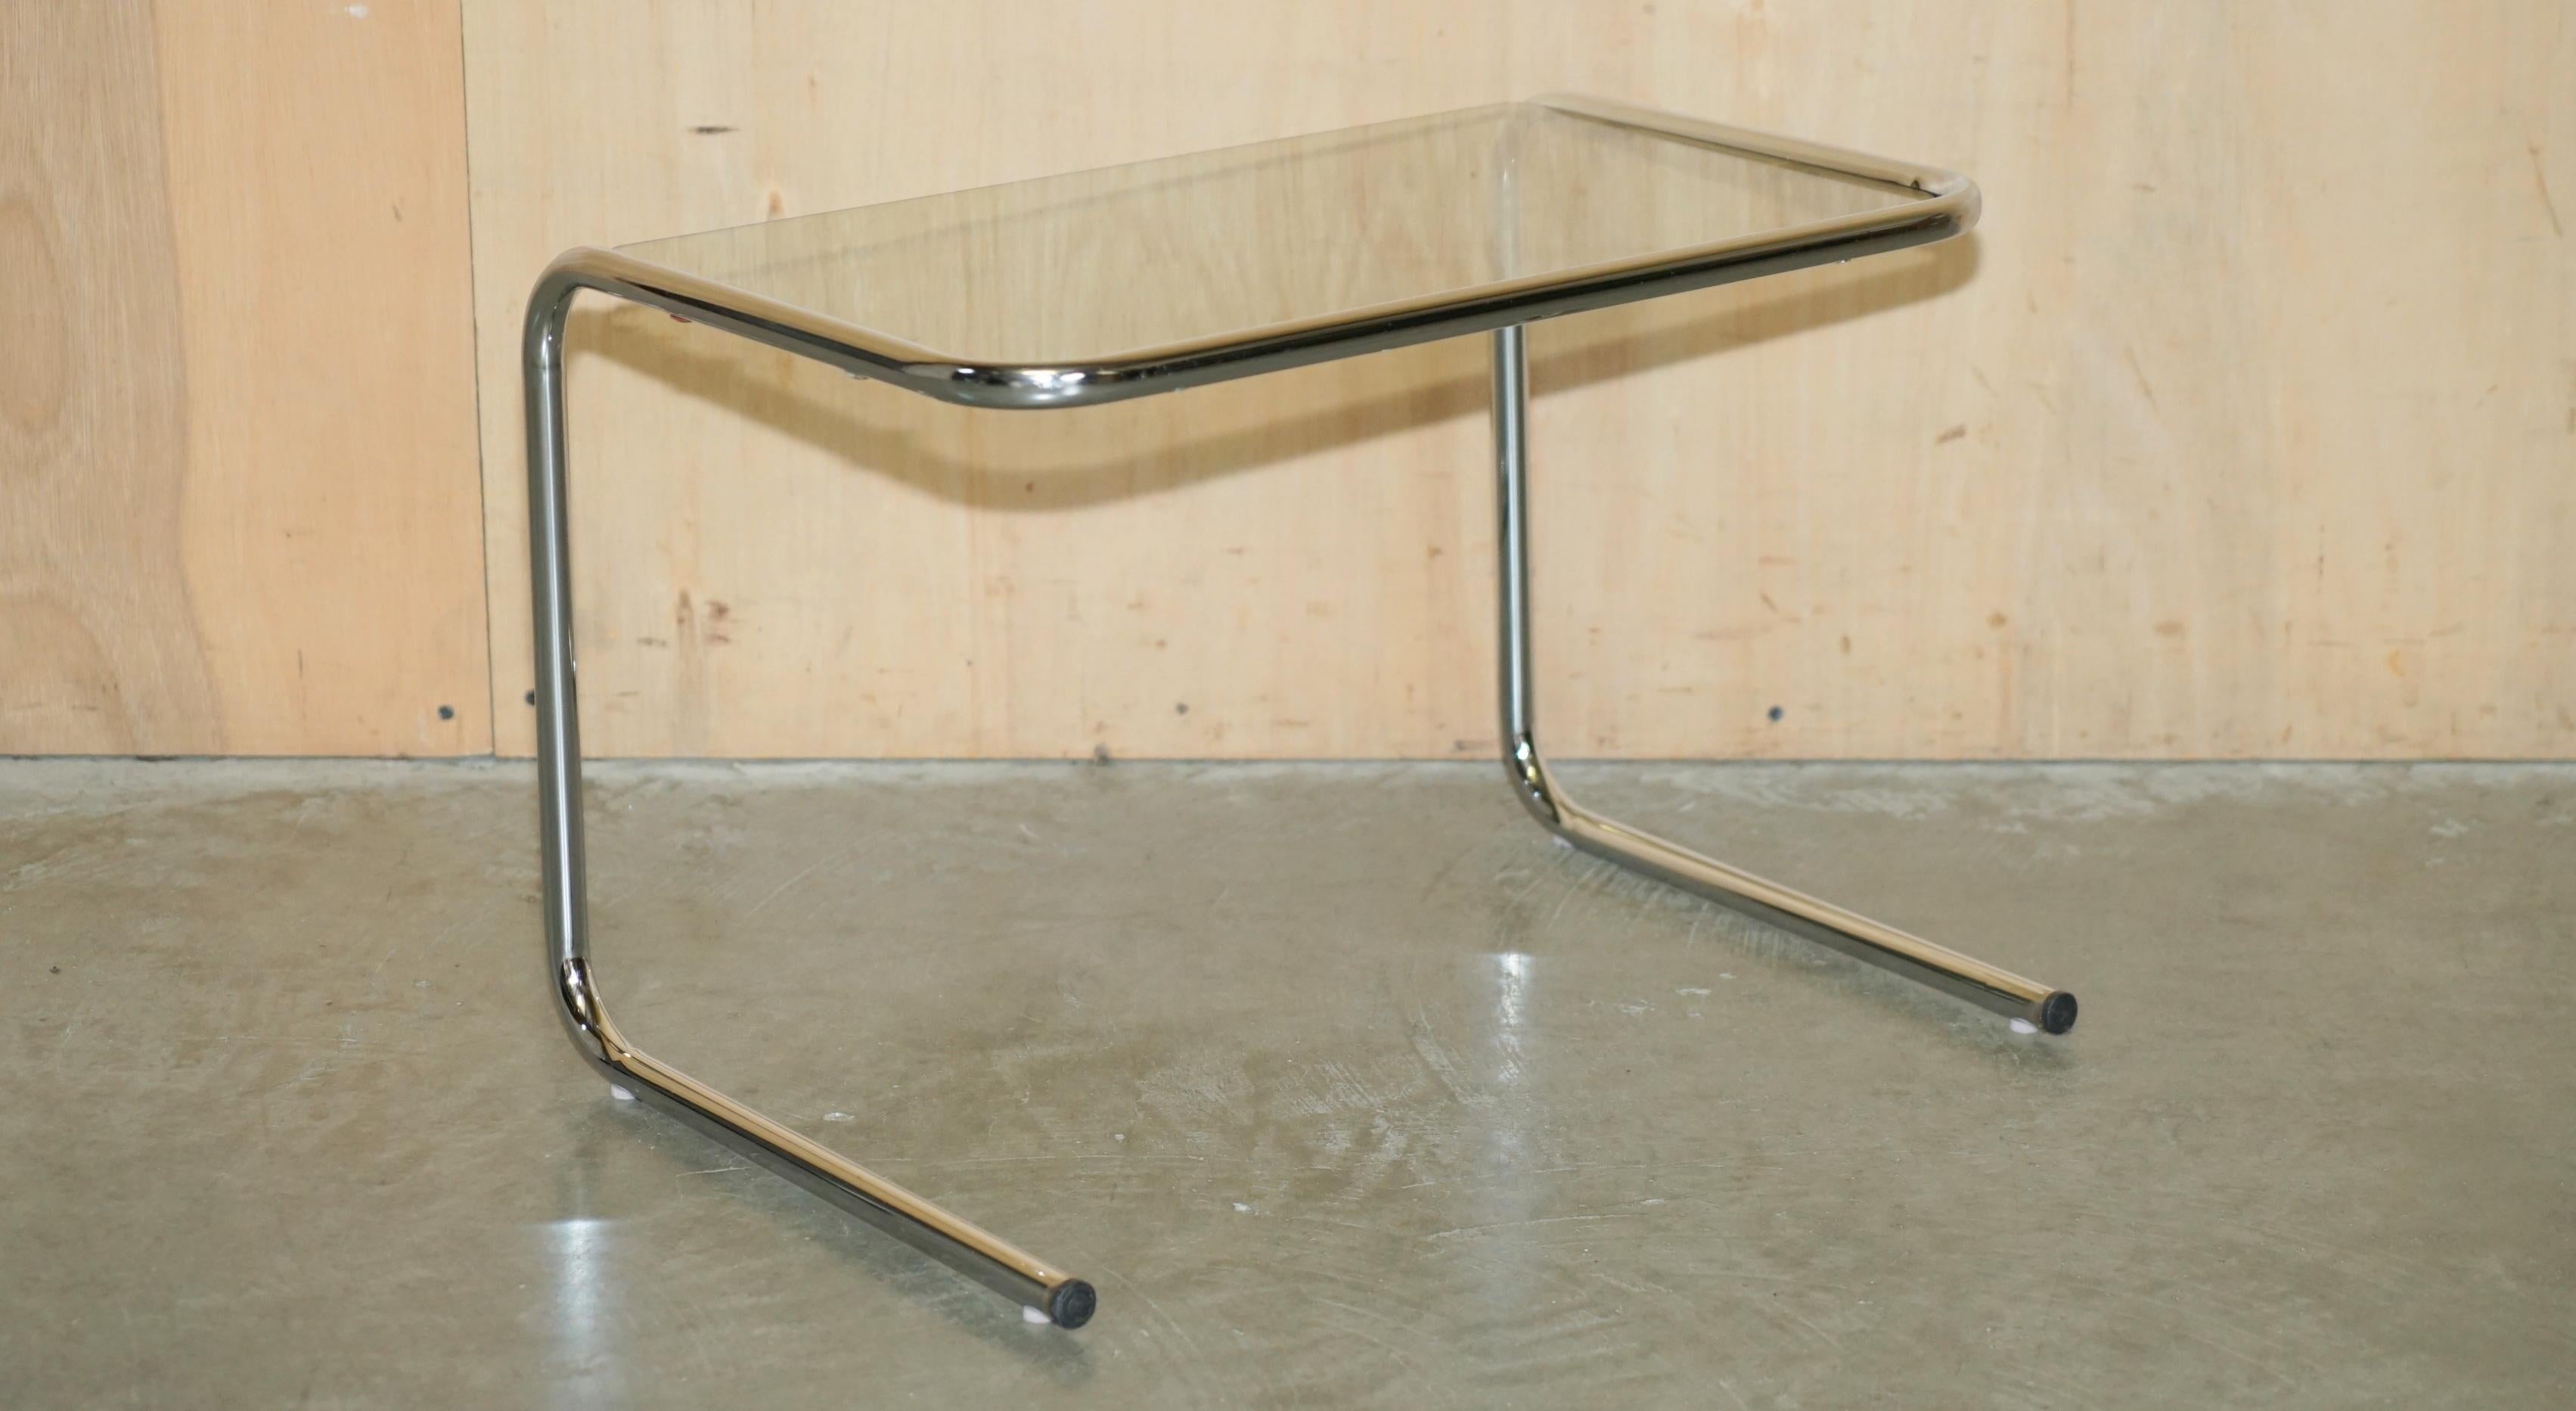 Royal House Antiques

Royal House Antiques is delighted to offer for sale this stunning Mid Century Modern nest of Smoked glass and Chrome tables after Milo Baughman

Please note the delivery fee listed is just a guide, it covers within the M25 only